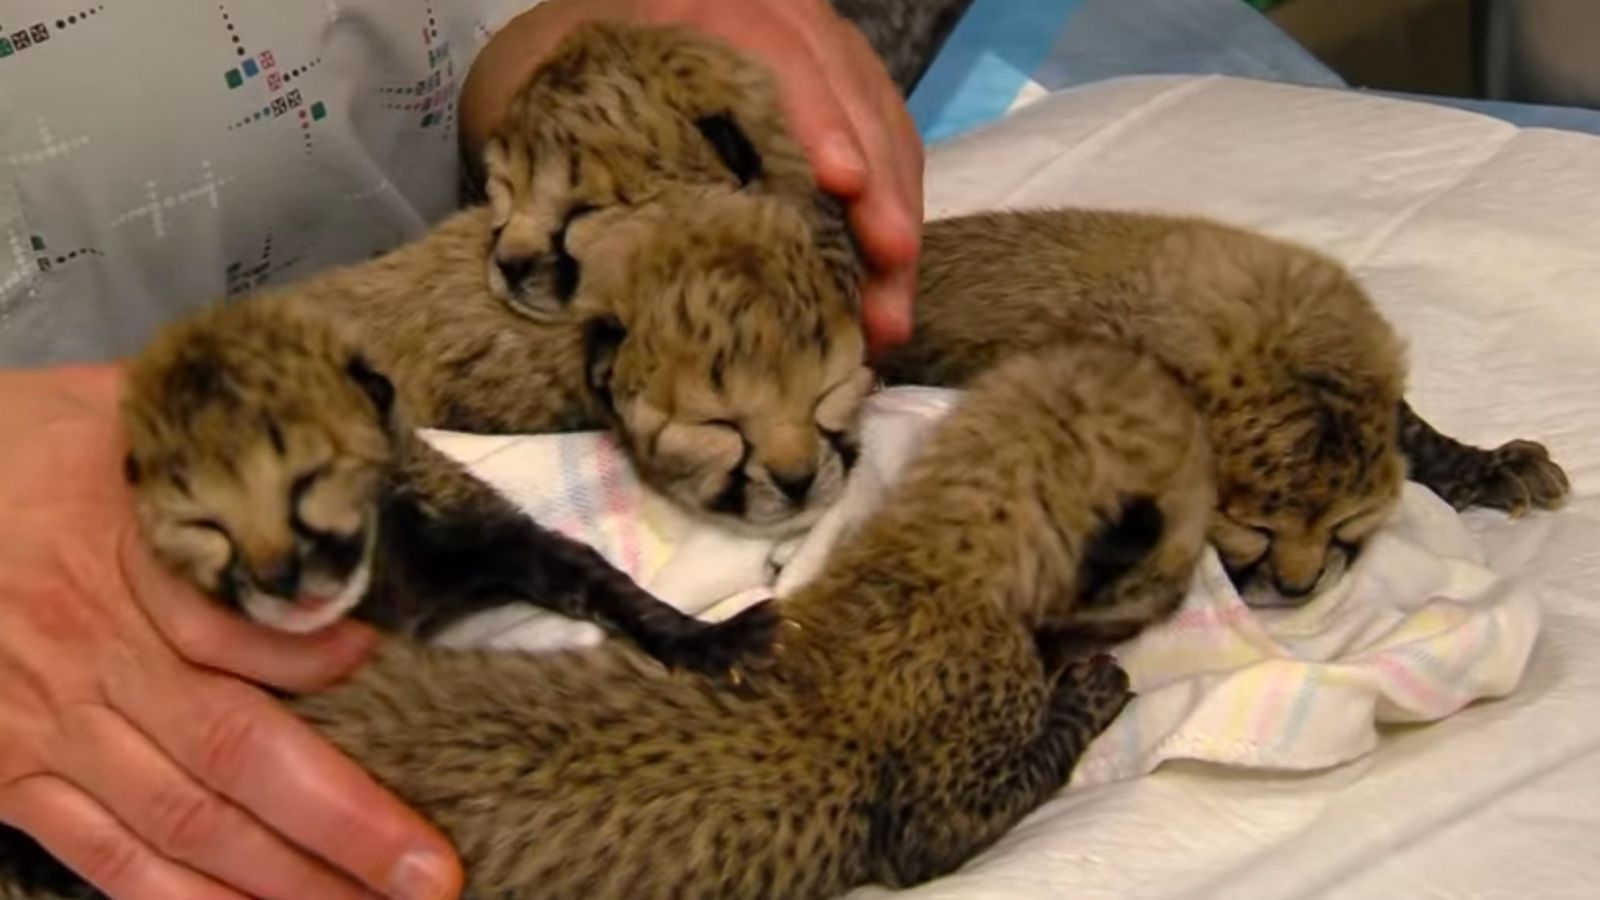 Adorable Video Shows Cheetah Cubs Being Cared for at Cincinnati Zoo After  Rare C-Section - ABC News